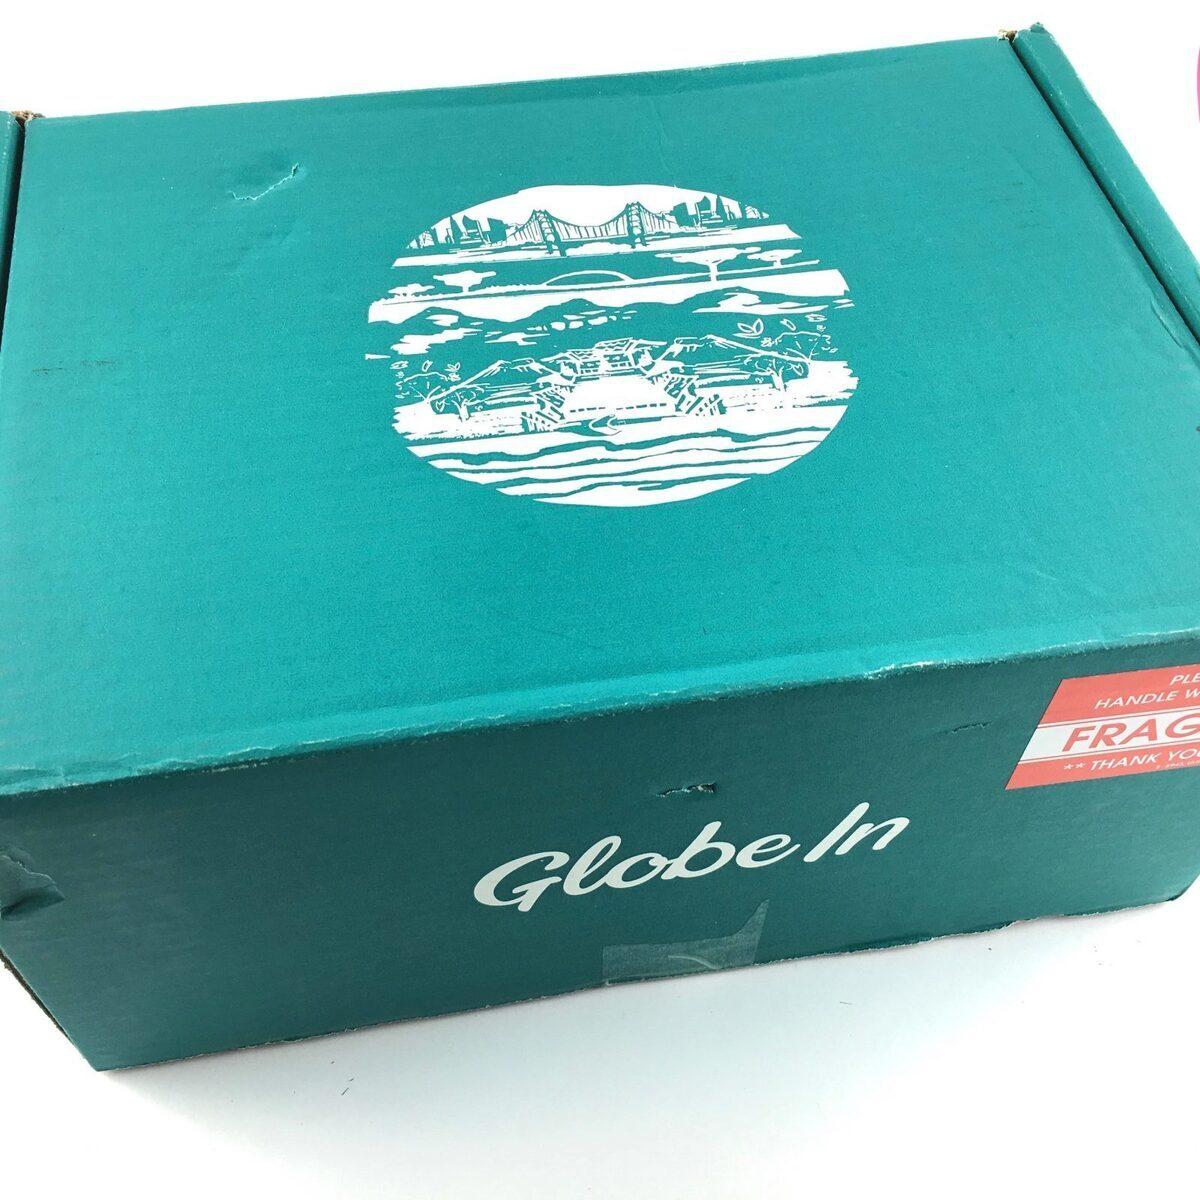 Read more about the article GlobeIn Artisan Box Black Friday Sale – Free Glassware Set with New Subscription!